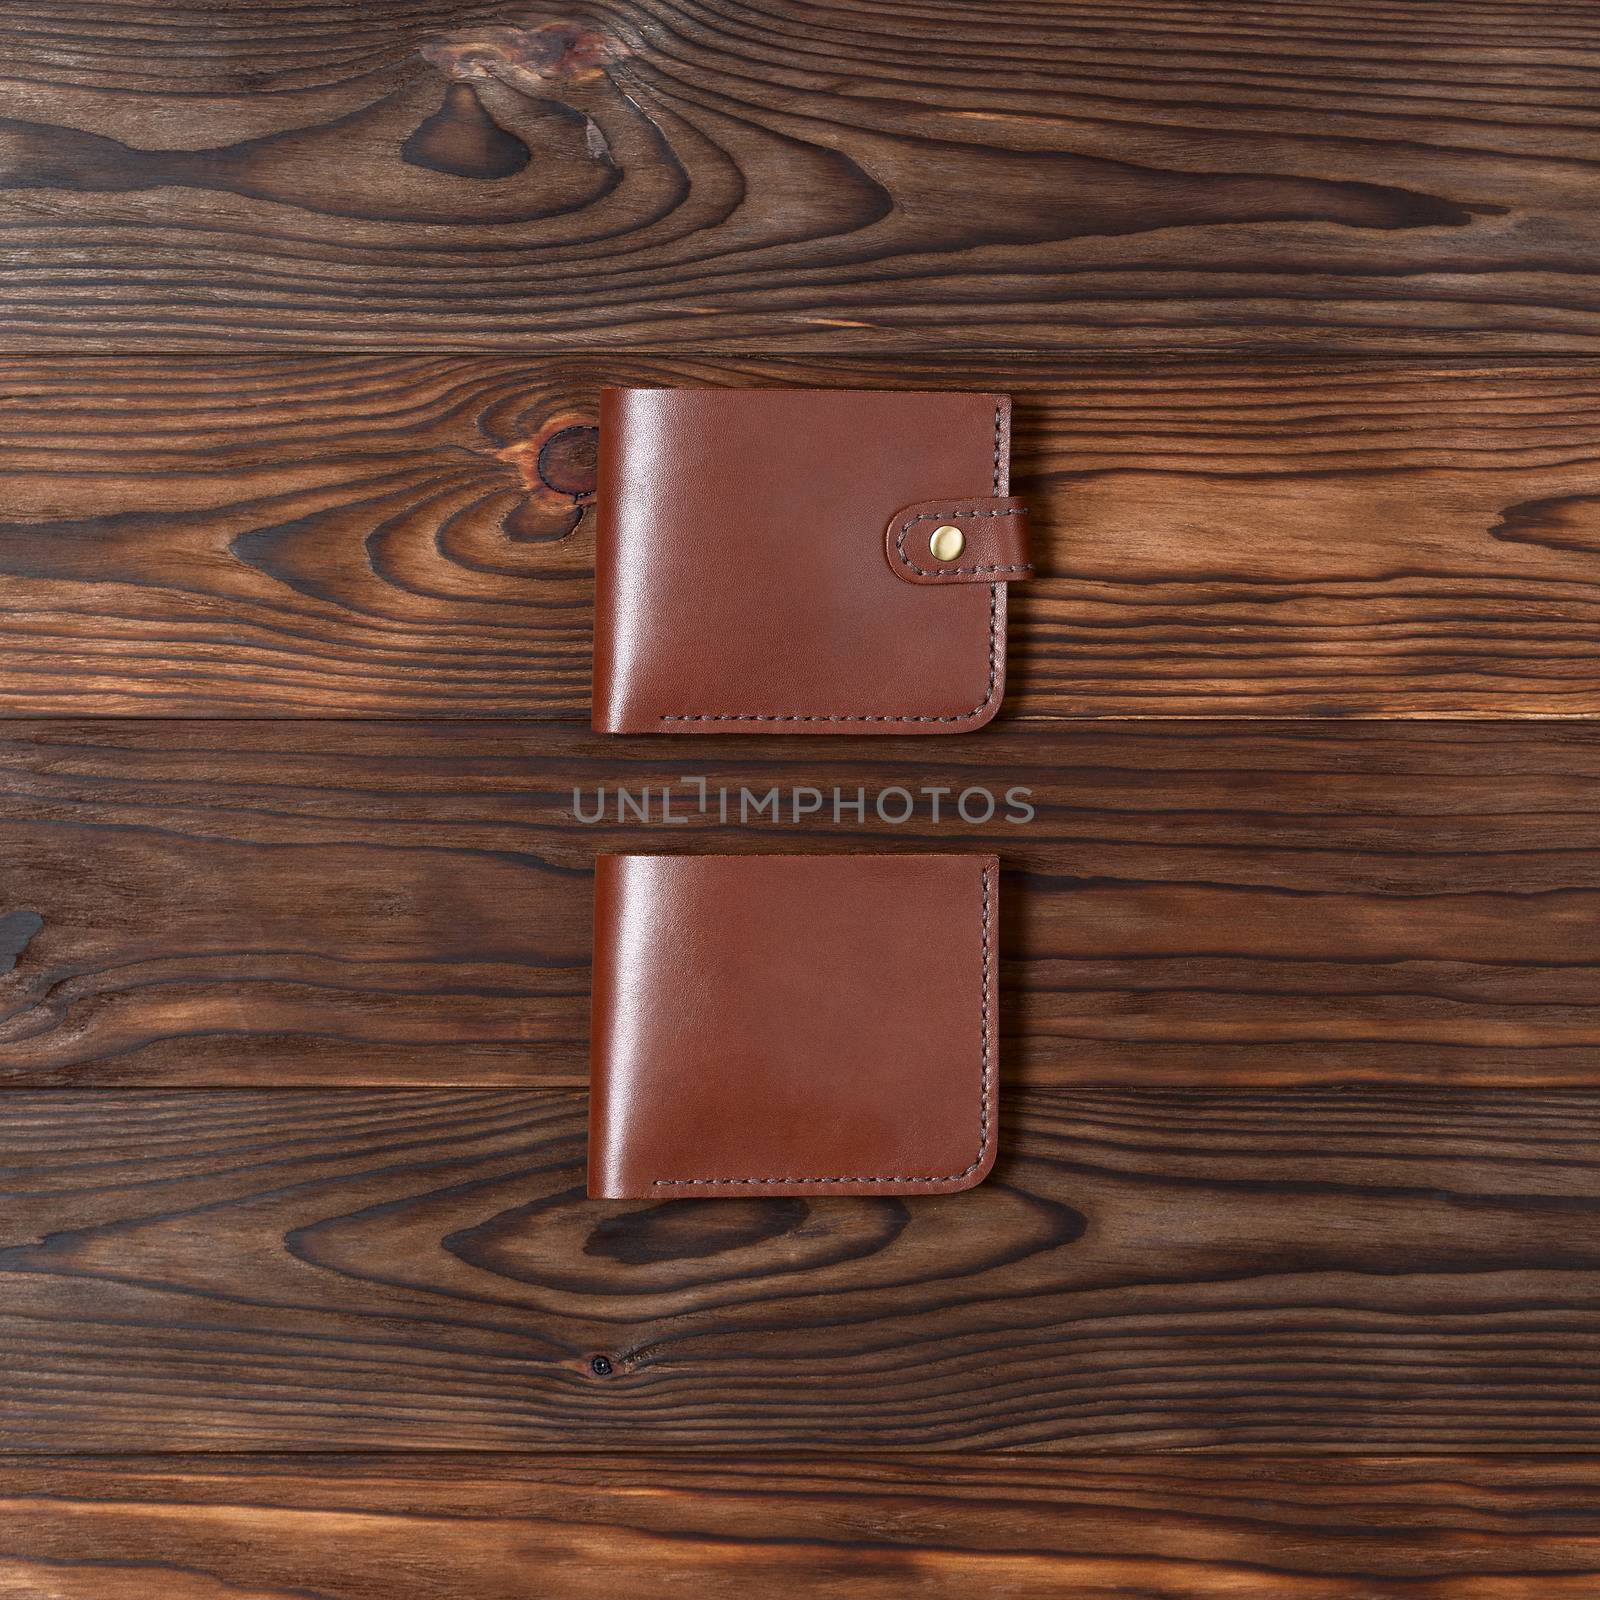 Red color handmade leather gloss wallets on wooden textured background. Up to down view. Wallet stock photo. by alexsdriver